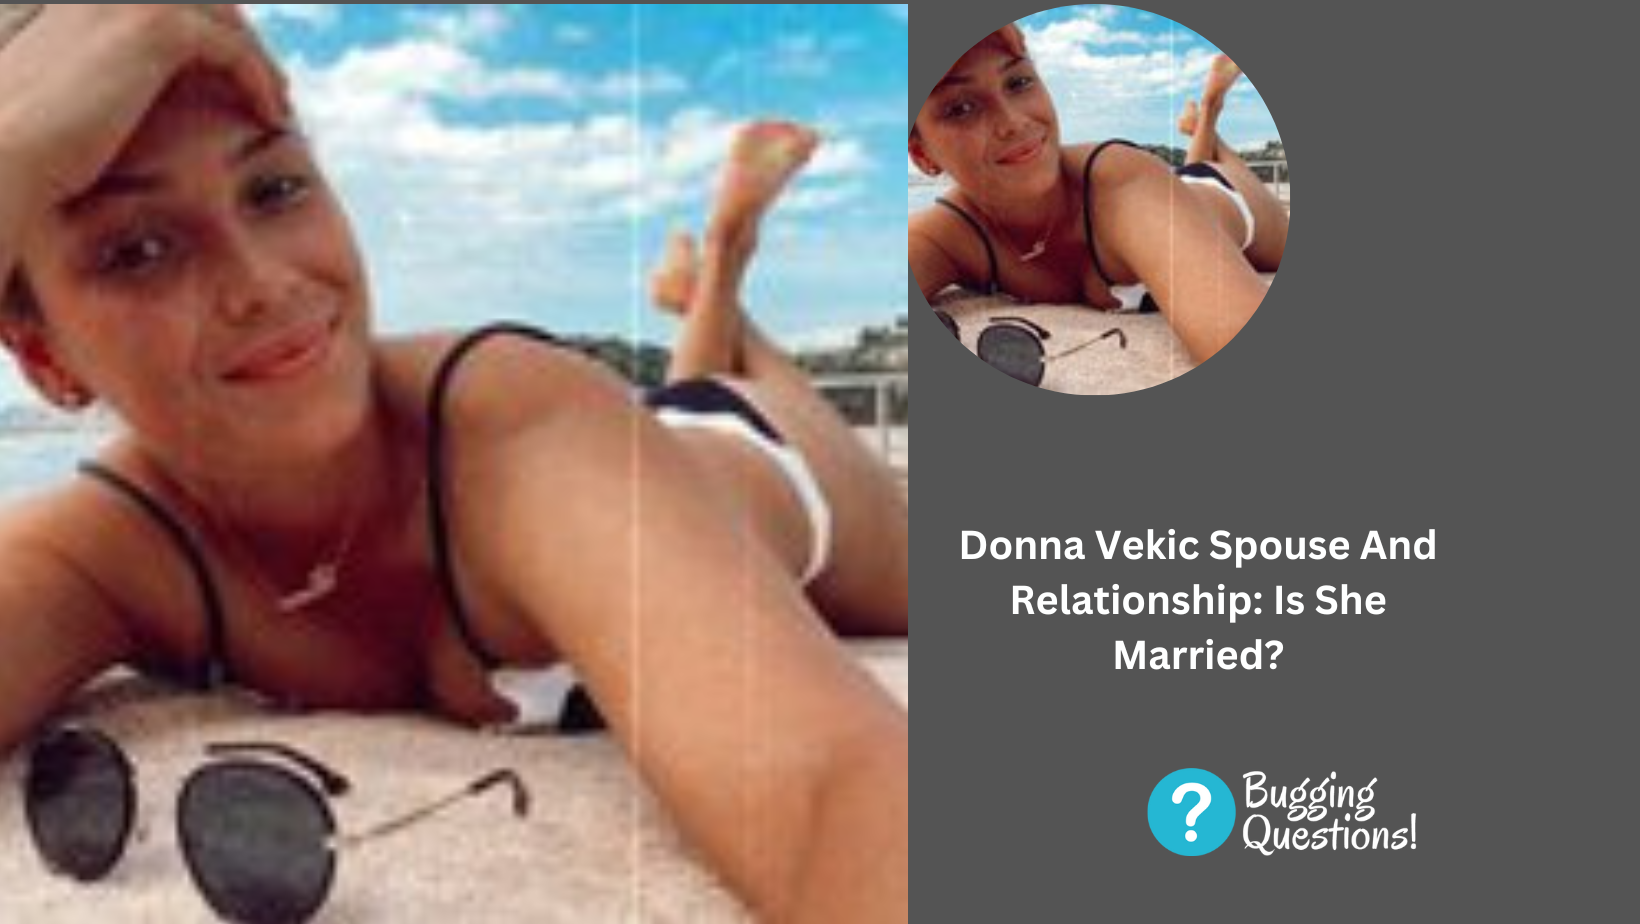 Donna Vekic Spouse And Relationship: Is She Married?